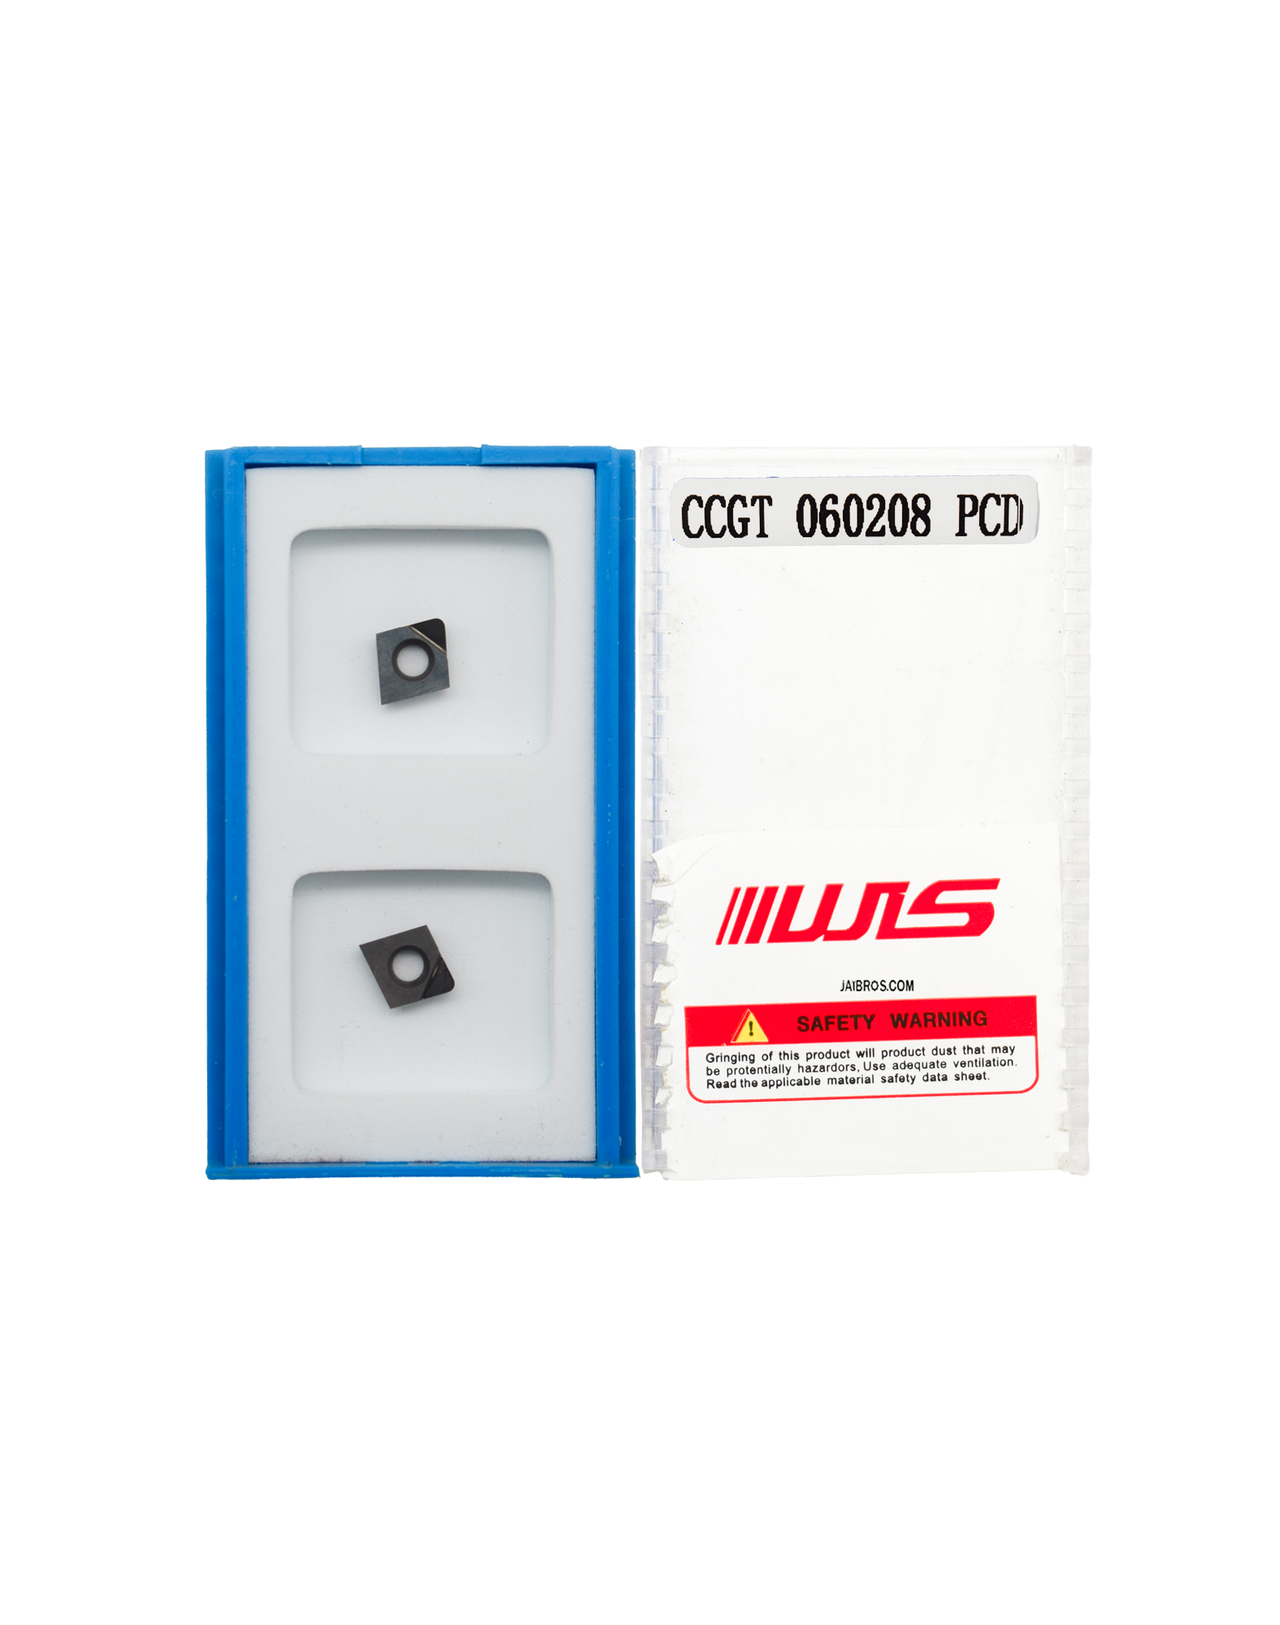 WS Pcd insert CCGW060202/04/08 pack of 2